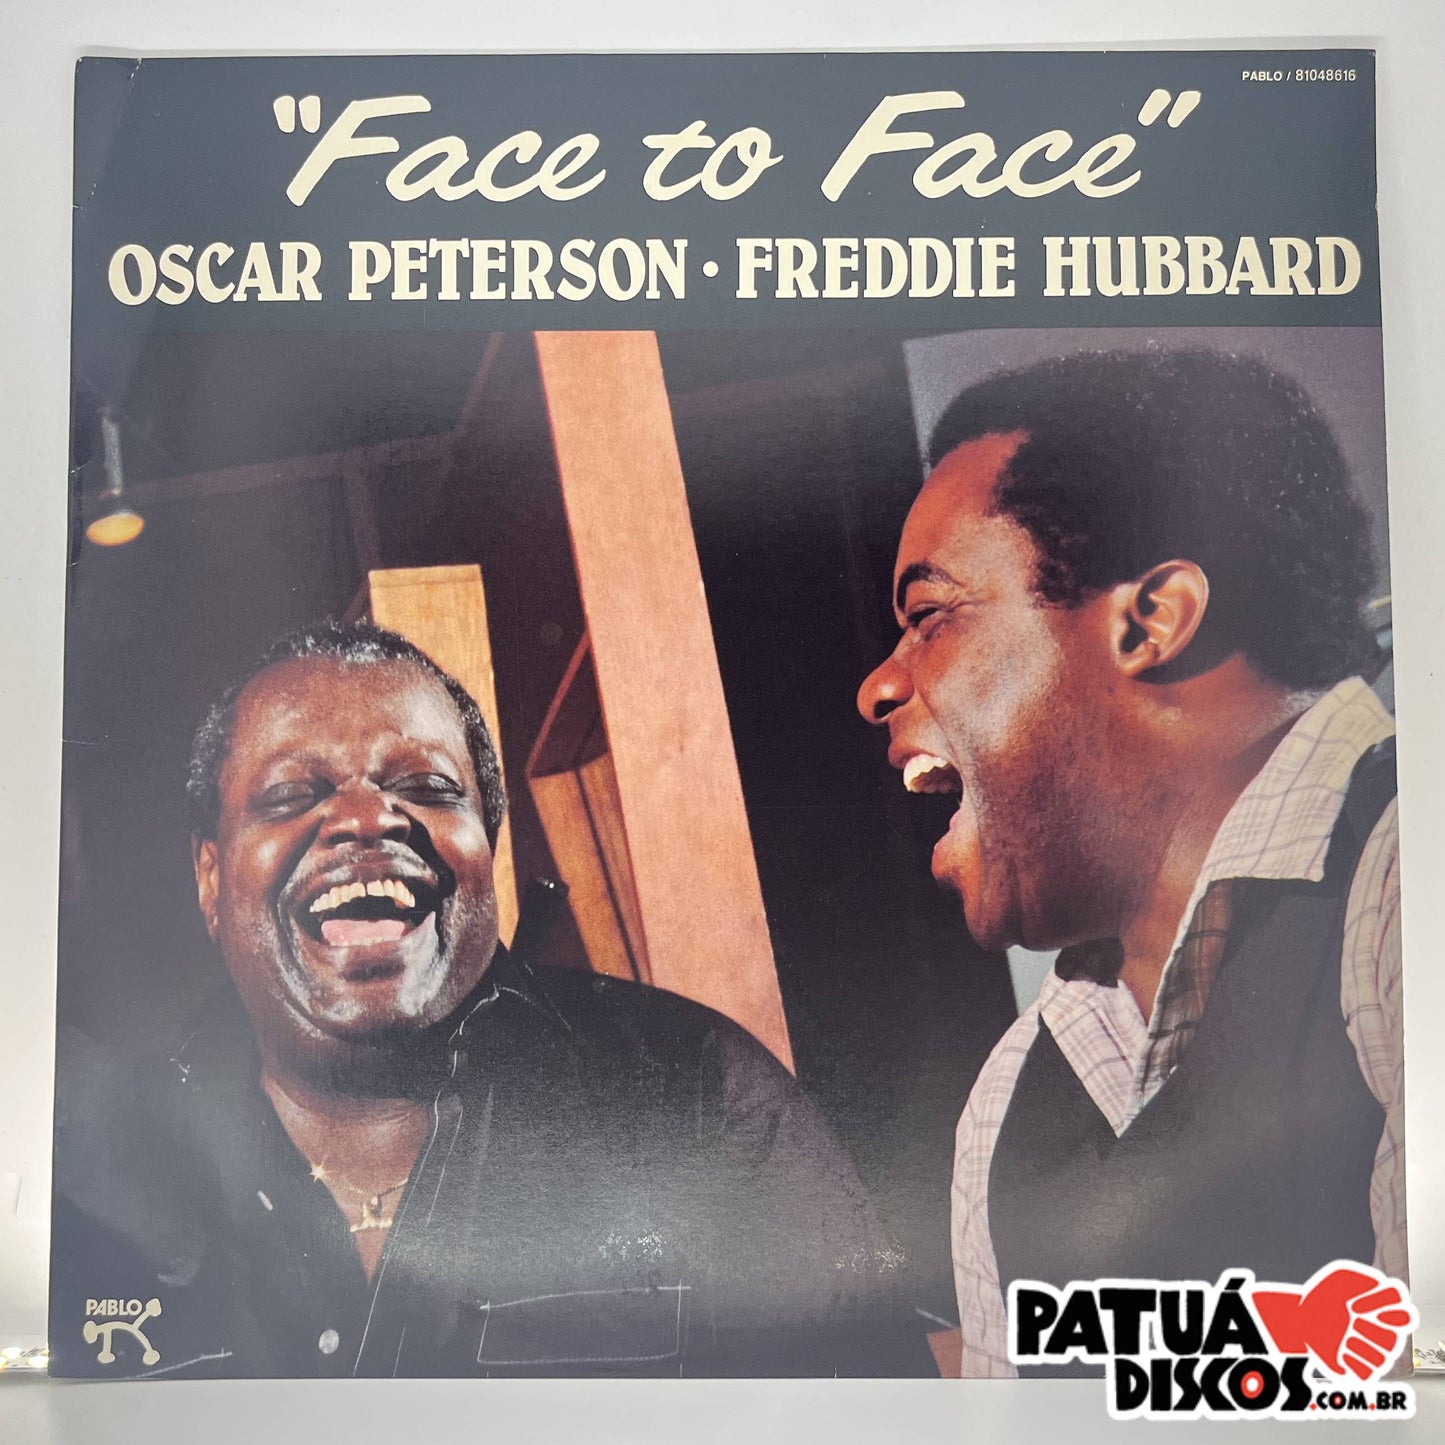 Freddie Hubbard & Oscar Peterson  - Face To Face - LP